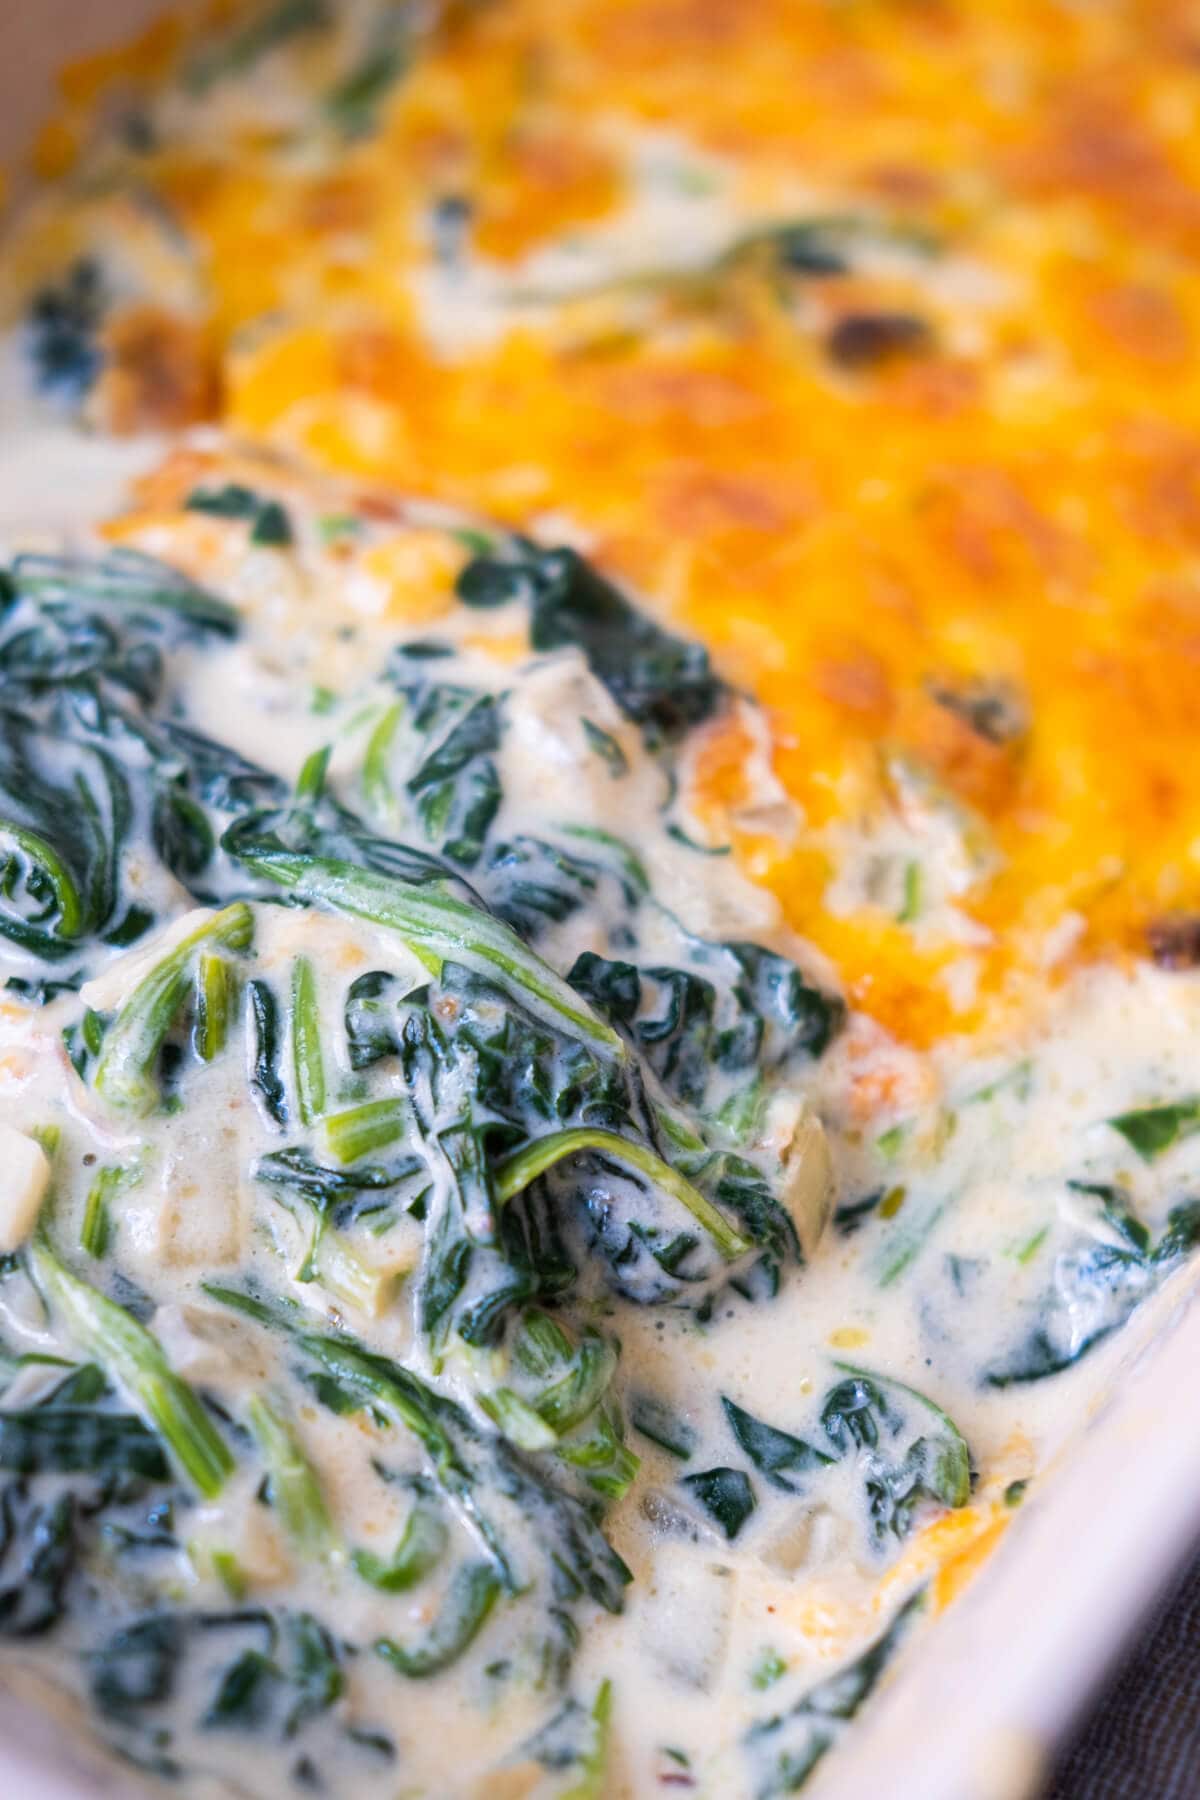 Spinach with cream sauce and baked cheese on top.